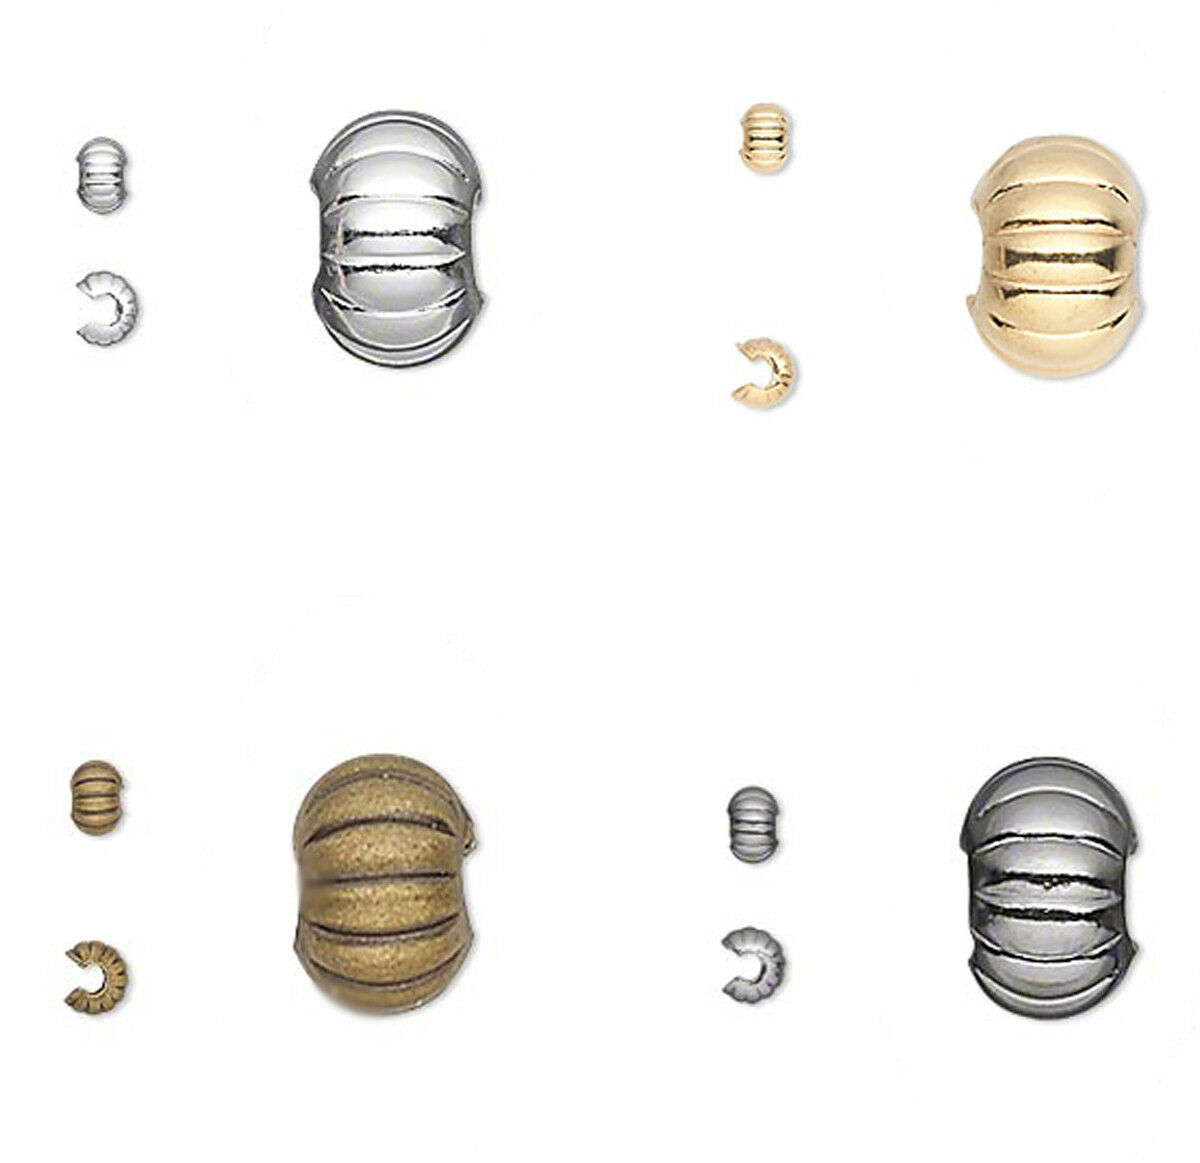 50 Corrugated Crimp Tube Bead Covers 3mm 4mm 5mm Gold  Silver  & Gunmetal Plated